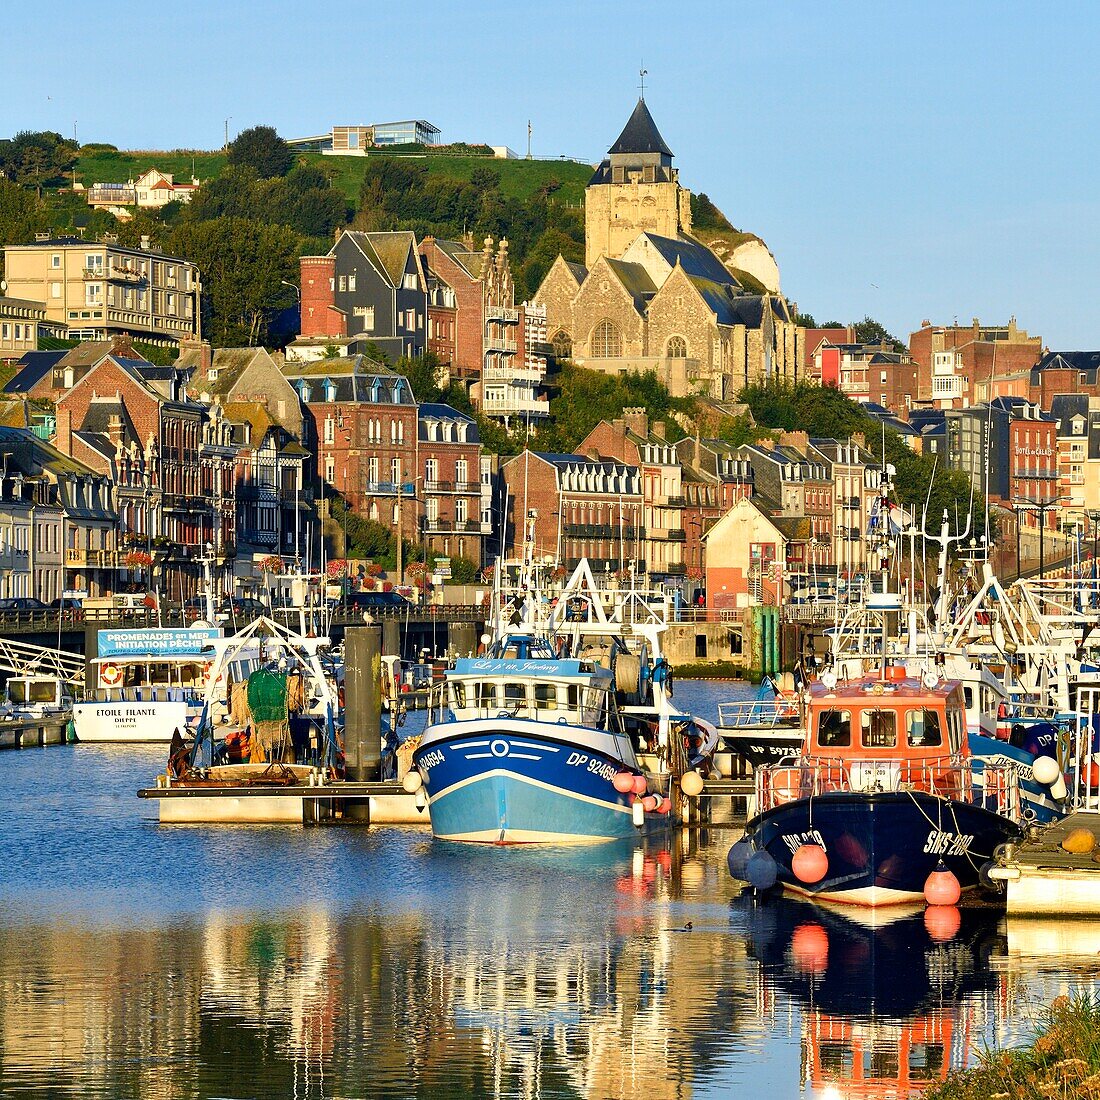 France, Seine Maritime, Le Treport, the fishing harbour and Saint Jacques church